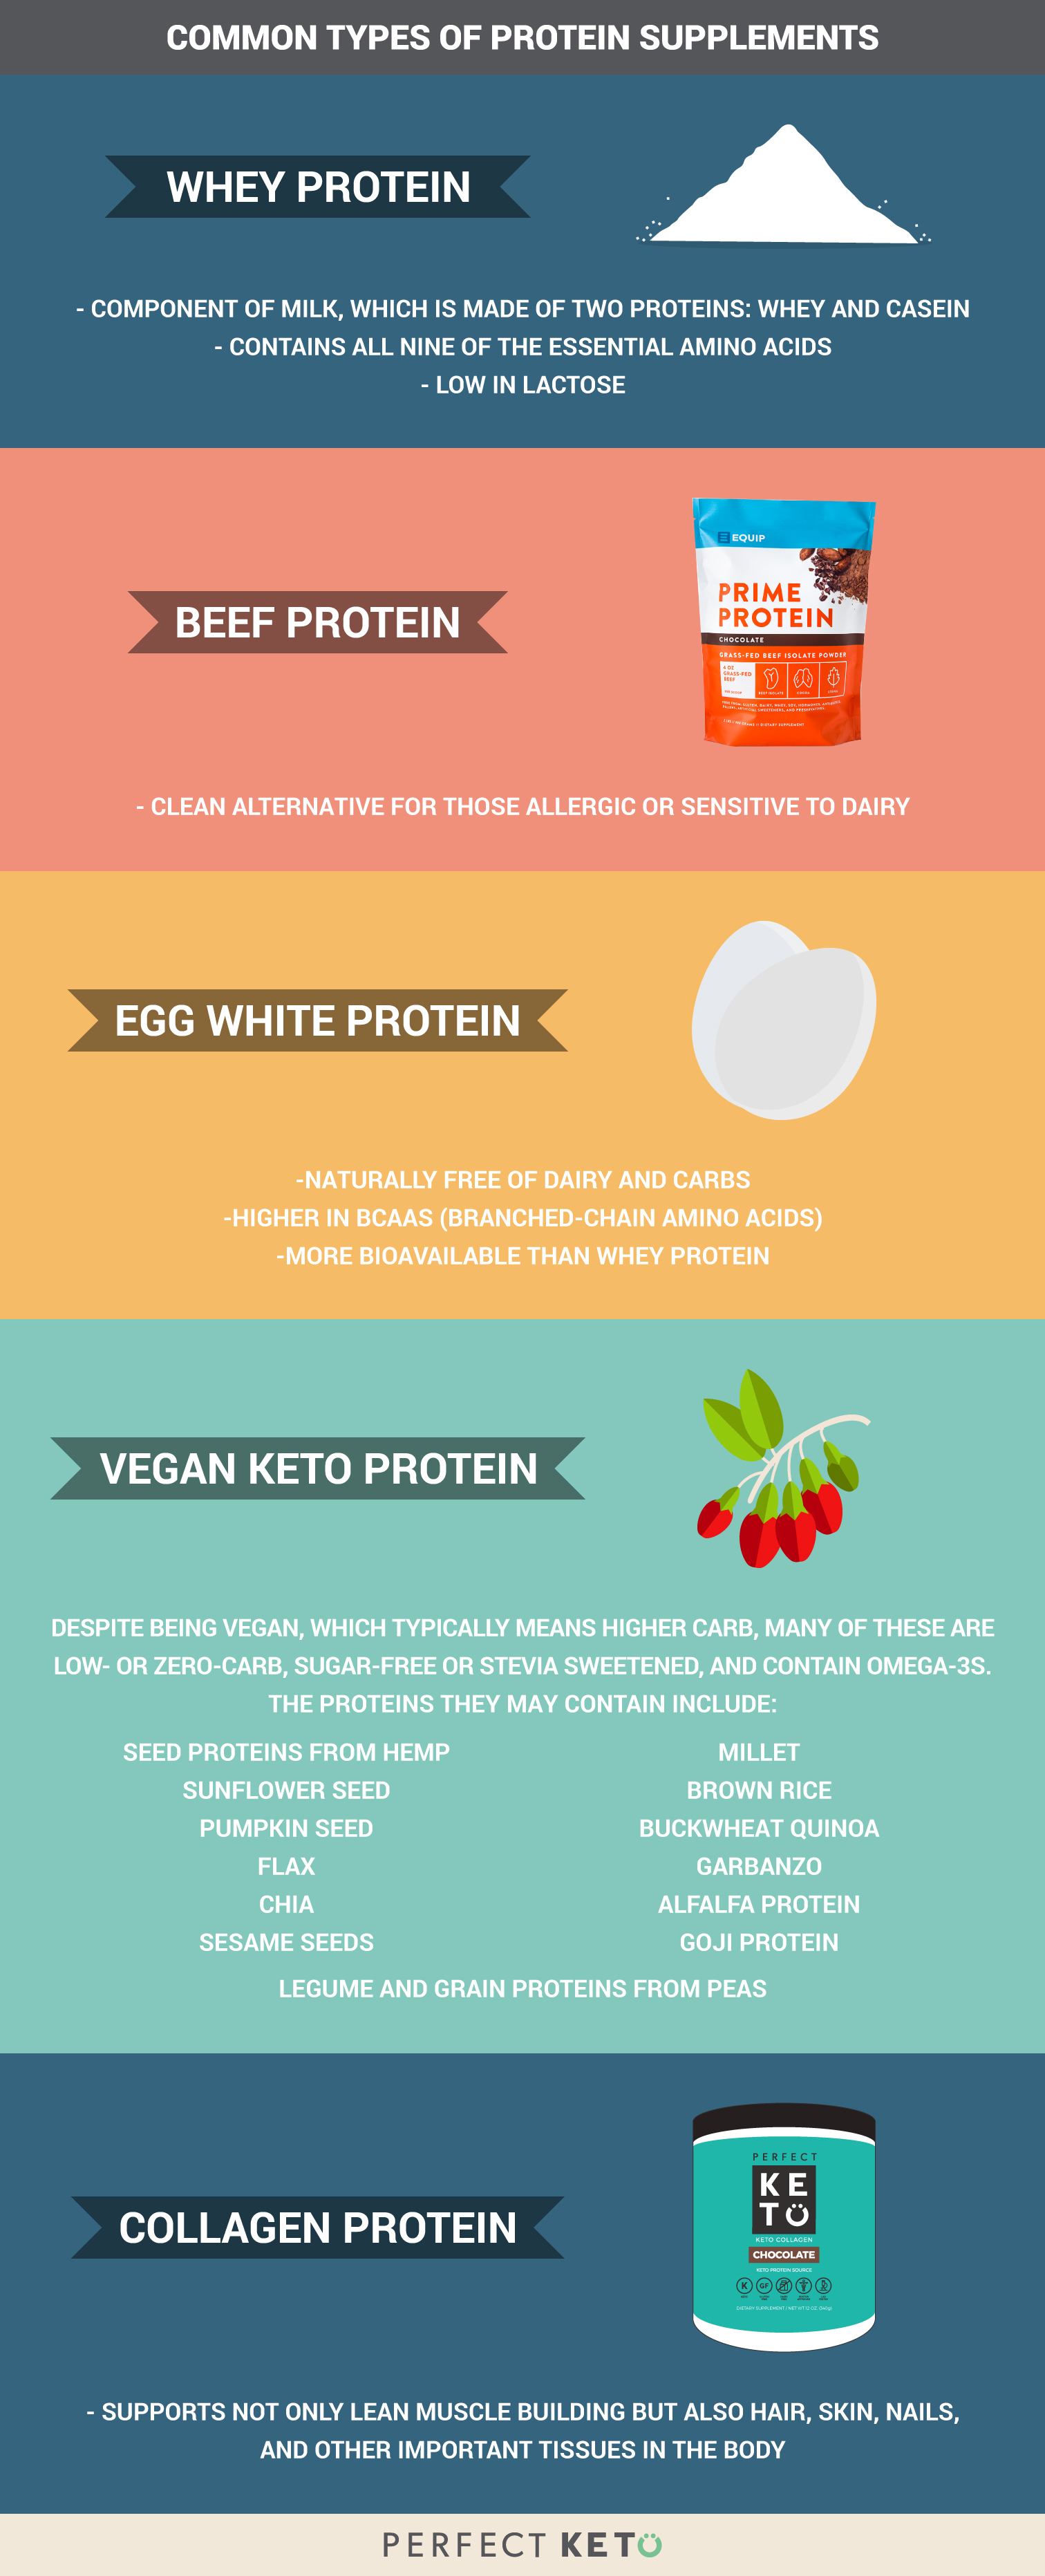 Your Guide to the Best Keto Friendly Protein Powder - Perfect Keto